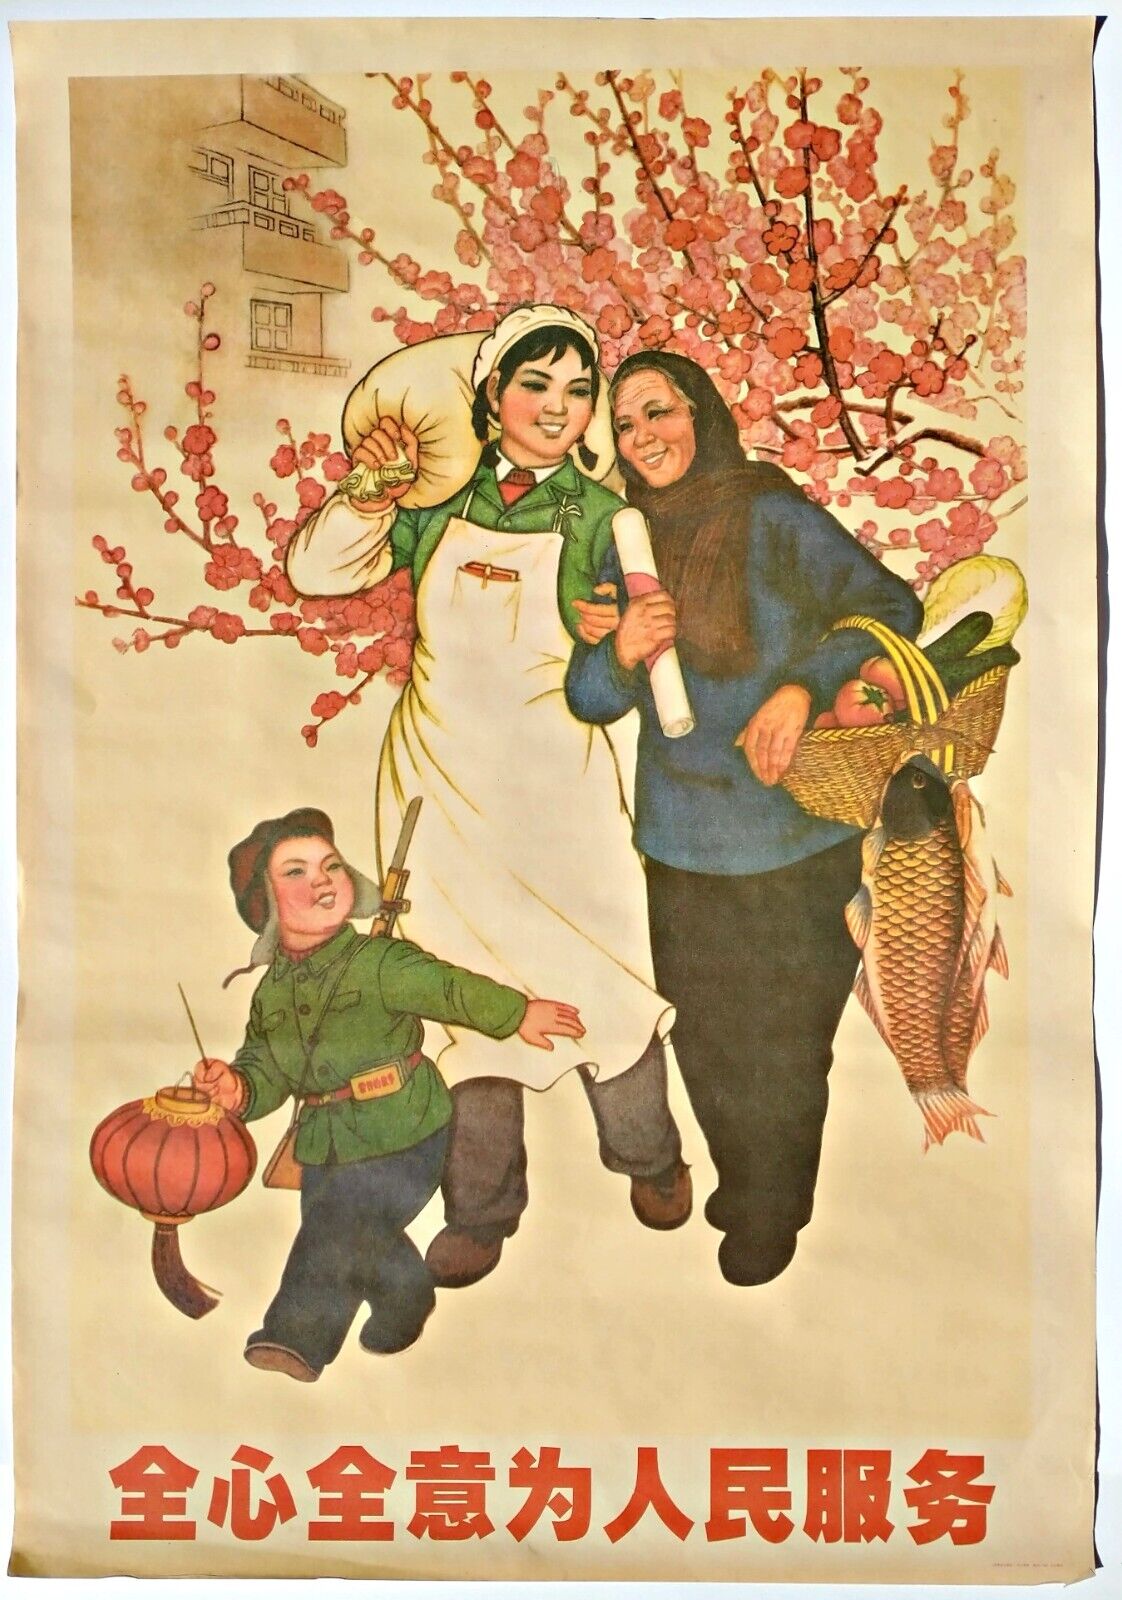 CHINESE CULTURAL REVOLUTION POSTER 60's VINTAGE - US SELLER - Very Unusual Theme